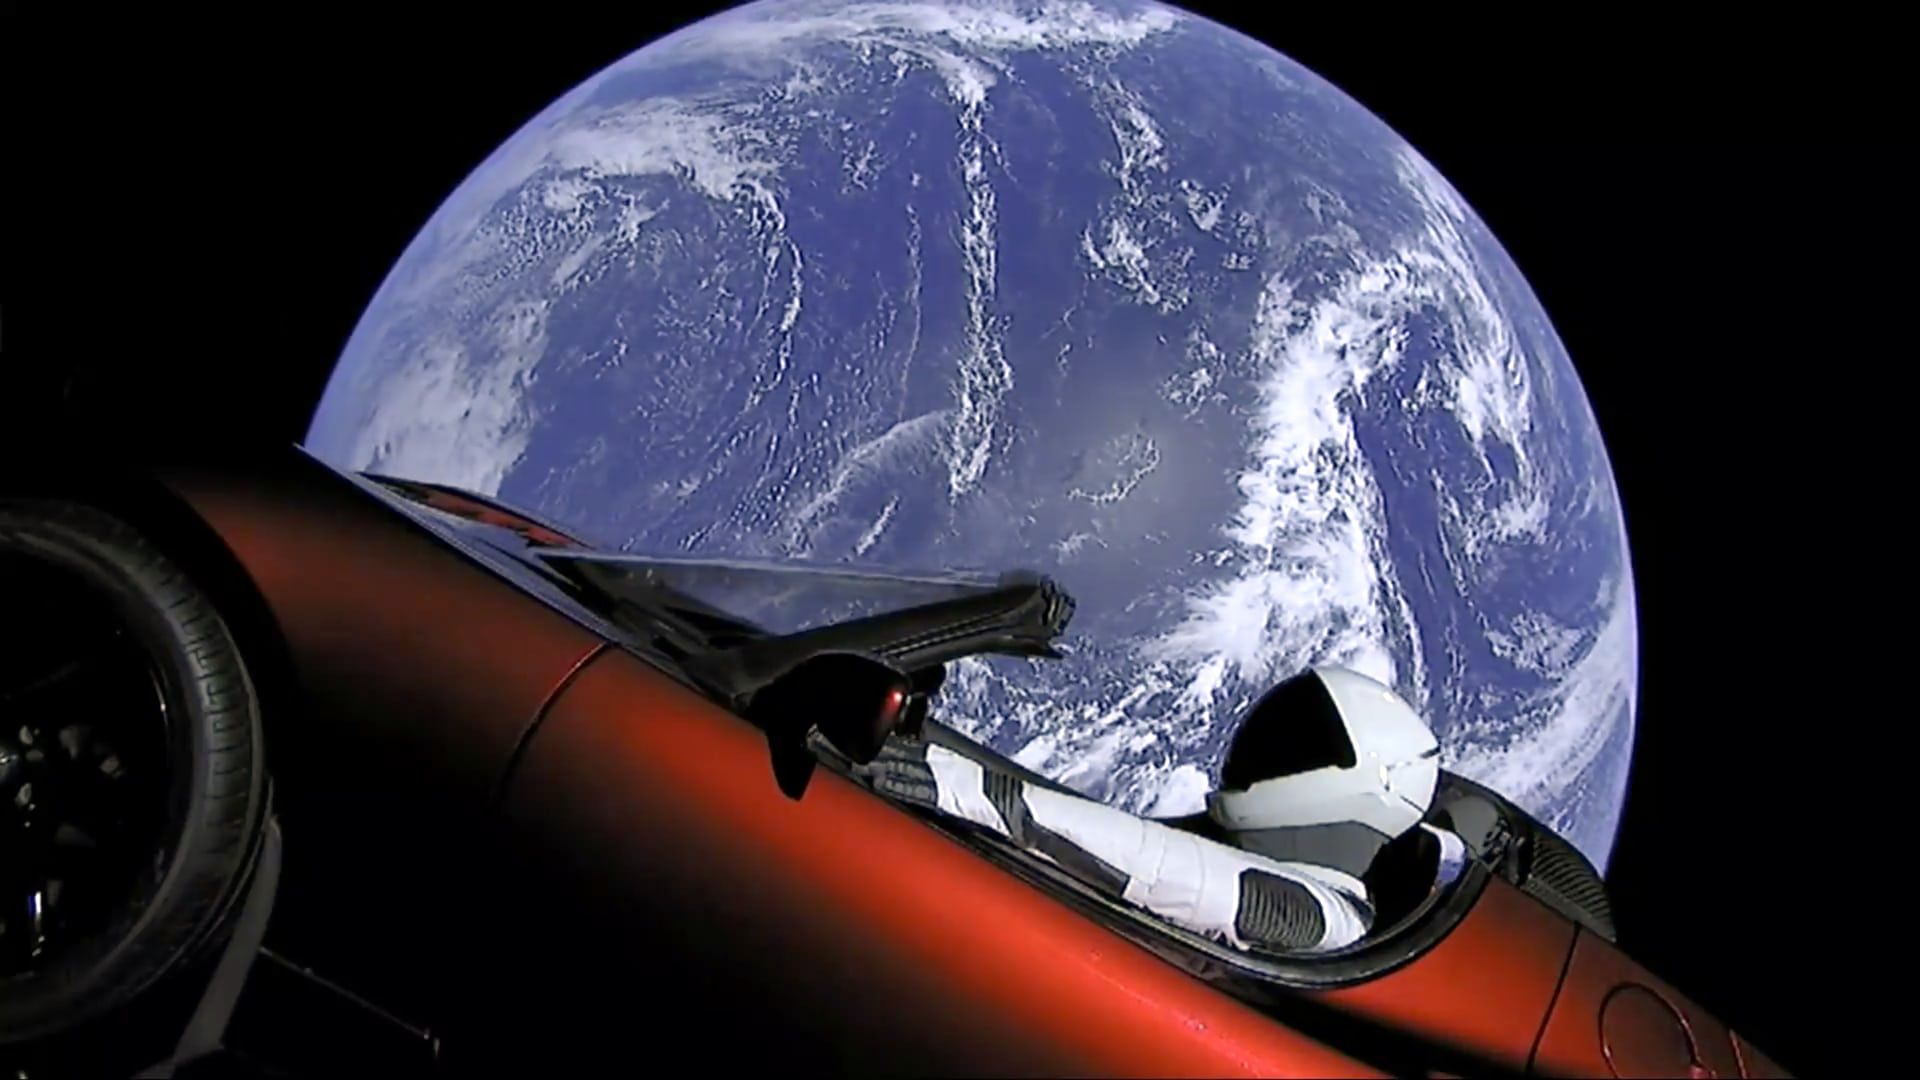 FACT CHECK: Is This Car Really in Space?